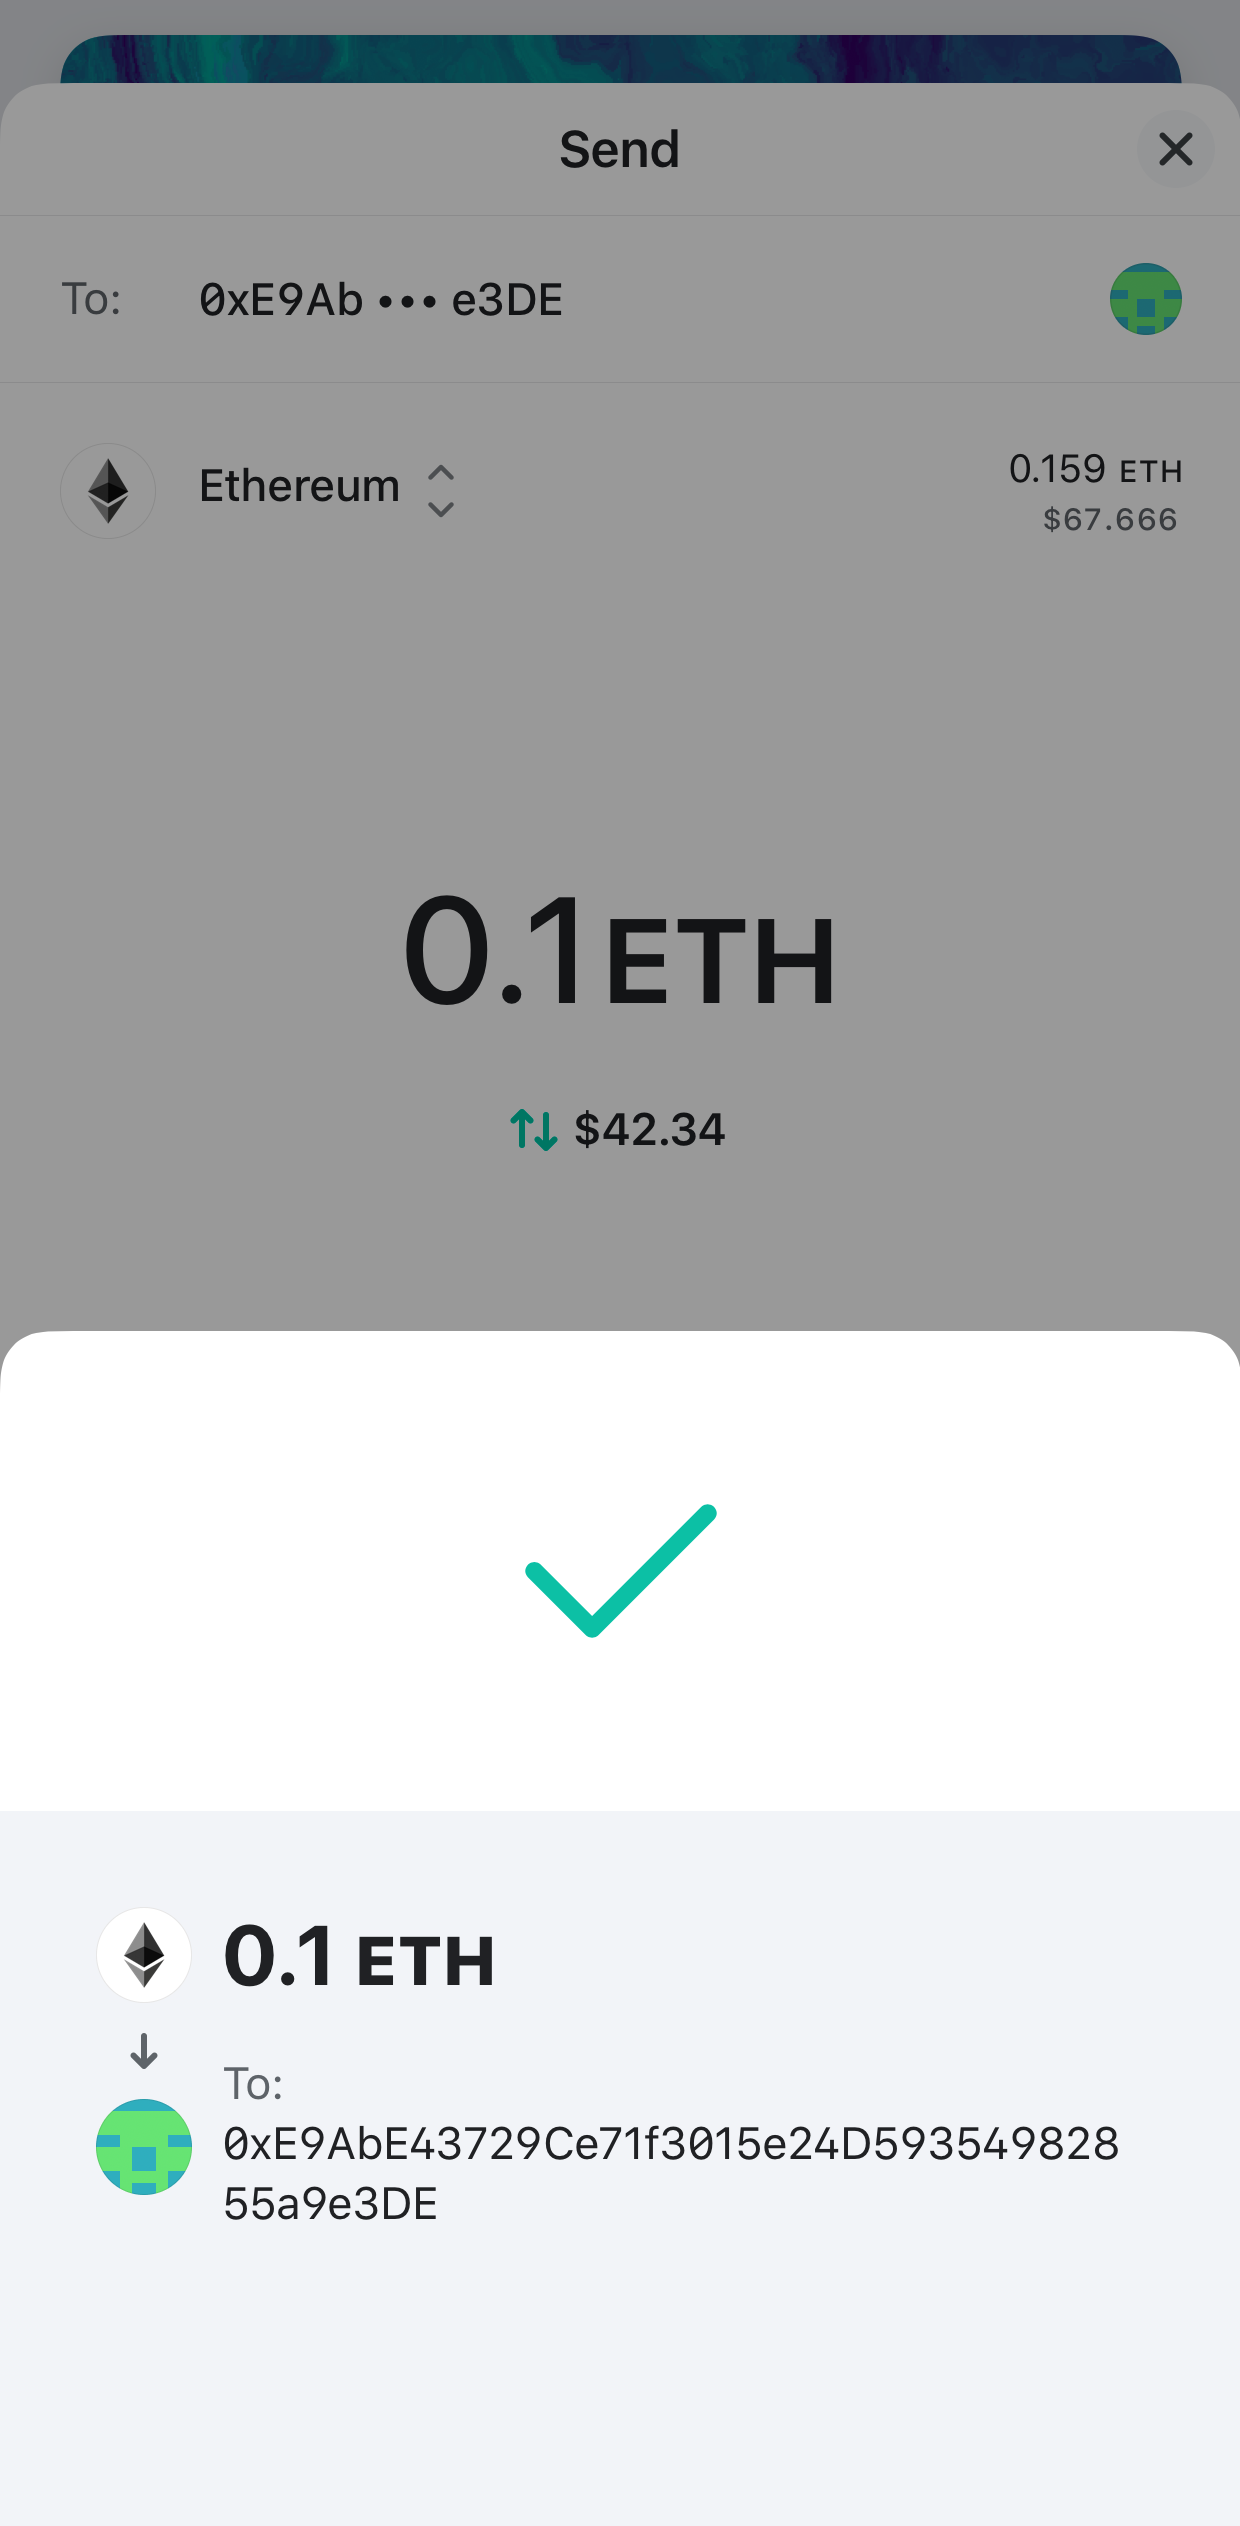 Image of MEW wallet successful transaction